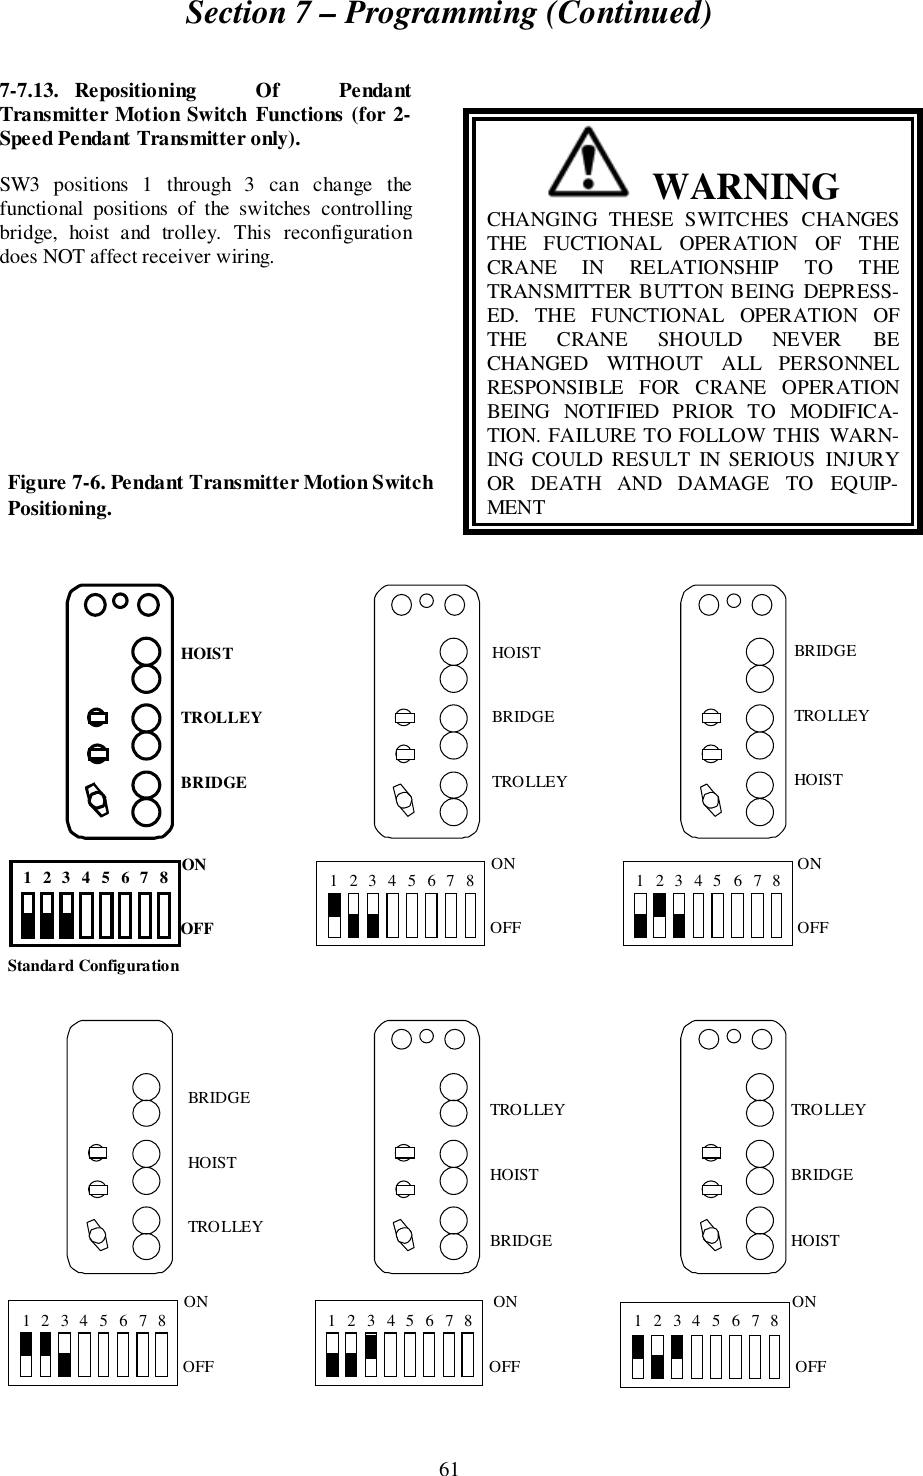 Section 7 – Programming (Continued)617-7.13. Repositioning Of PendantTransmitter Motion Switch Functions (for 2-Speed Pendant Transmitter only).SW3 positions 1 through 3 can change thefunctional positions of the switches controllingbridge, hoist and trolley. This reconfigurationdoes NOT affect receiver wiring.  WARNINGCHANGING THESE SWITCHES CHANGESTHE FUCTIONAL OPERATION OF THECRANE IN RELATIONSHIP TO THETRANSMITTER BUTTON BEING DEPRESS-ED. THE FUNCTIONAL OPERATION OFTHE CRANE SHOULD NEVER BECHANGED WITHOUT ALL PERSONNELRESPONSIBLE FOR CRANE OPERATIONBEING NOTIFIED PRIOR TO MODIFICA-TION. FAILURE TO FOLLOW THIS WARN-ING COULD RESULT IN SERIOUS INJURYOR DEATH AND DAMAGE TO EQUIP-MENTHOISTTROLLEYBRIDGEHOISTBRIDGETROLLEYBRIDGETROLLEYHOISTBRIDGEHOISTTROLLEYTROLLEYHOISTBRIDGETROLLEYBRIDGEHOIST12345678ONOFFStandard Configuration12345678 ONOFF12345678 ONOFF12345678 ONOFF12345678 ONOFF12345678ONOFFFigure 7-6. Pendant Transmitter Motion SwitchPositioning.